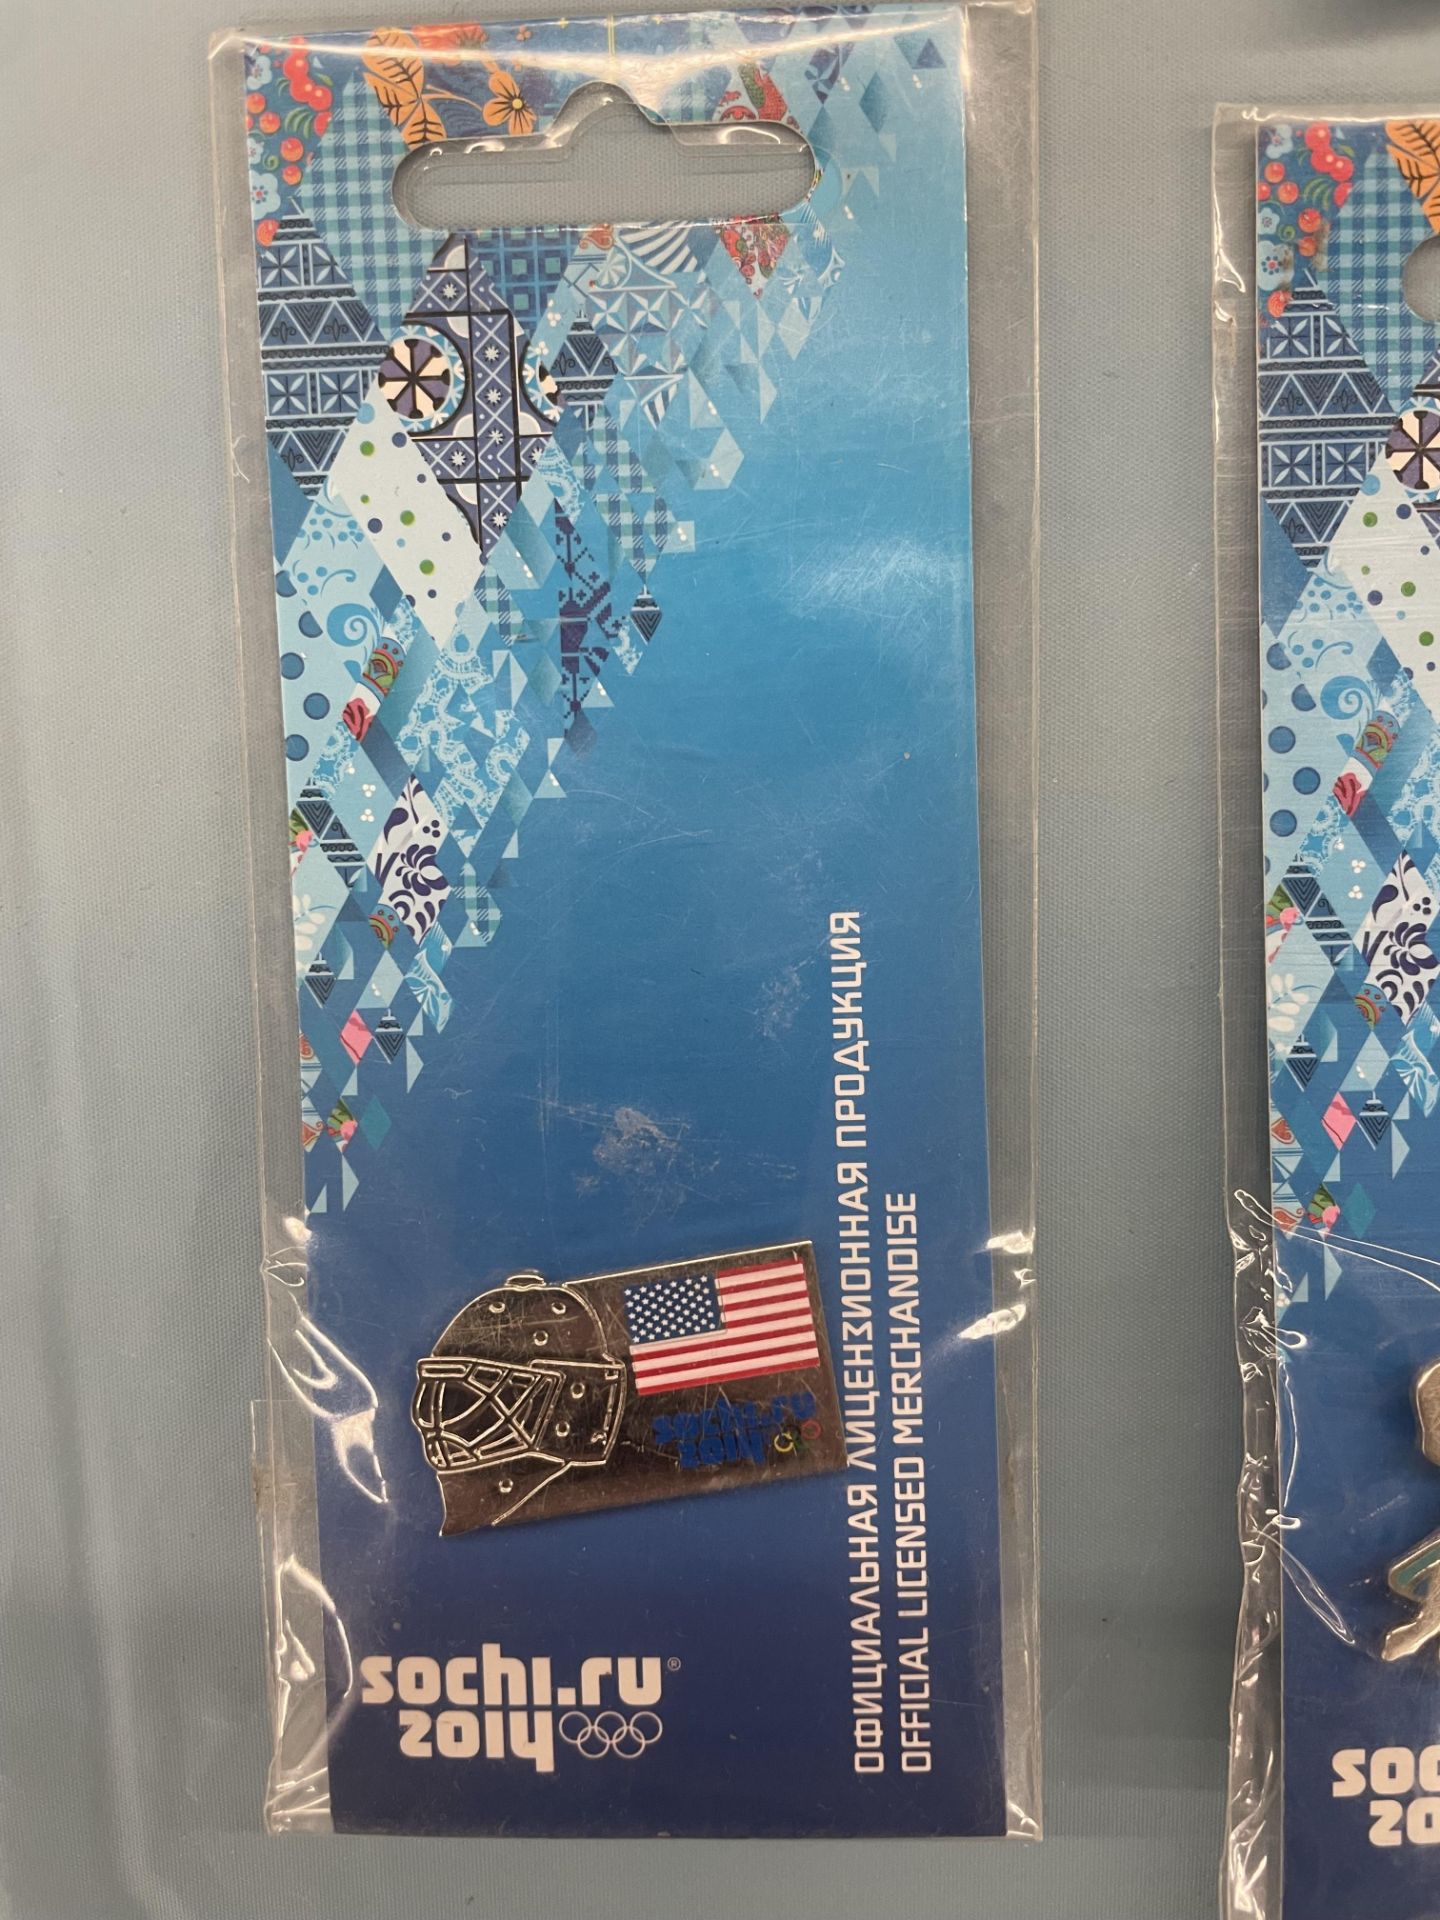 (Lot) (6) Sochi 2014 Russia Olympics Commemorative Pins ( USA, Finland, Russia Sweden, (2) Olympic ) - Image 2 of 8